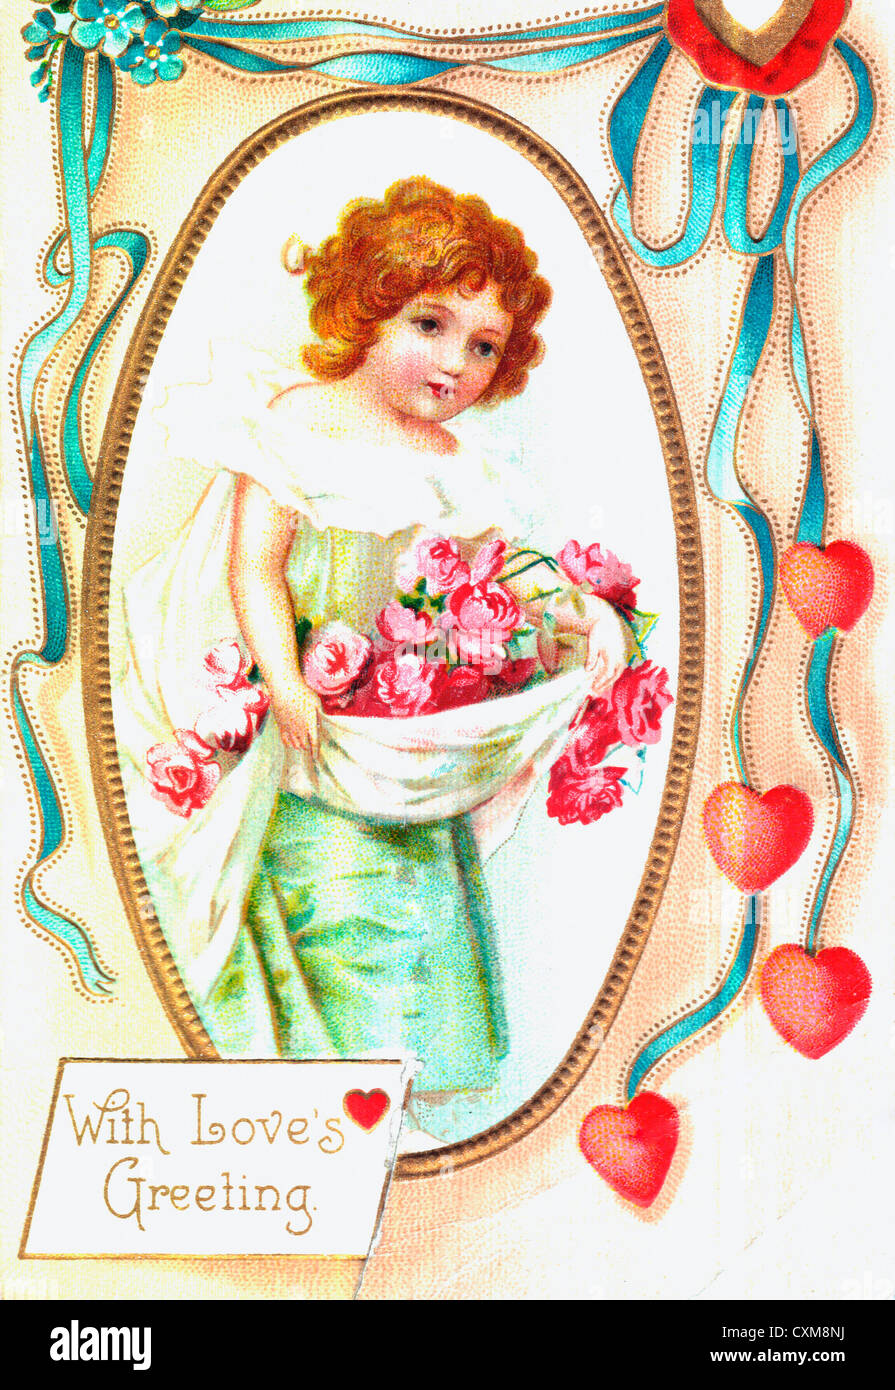 With Love's Greeting - vintage card Stock Photo